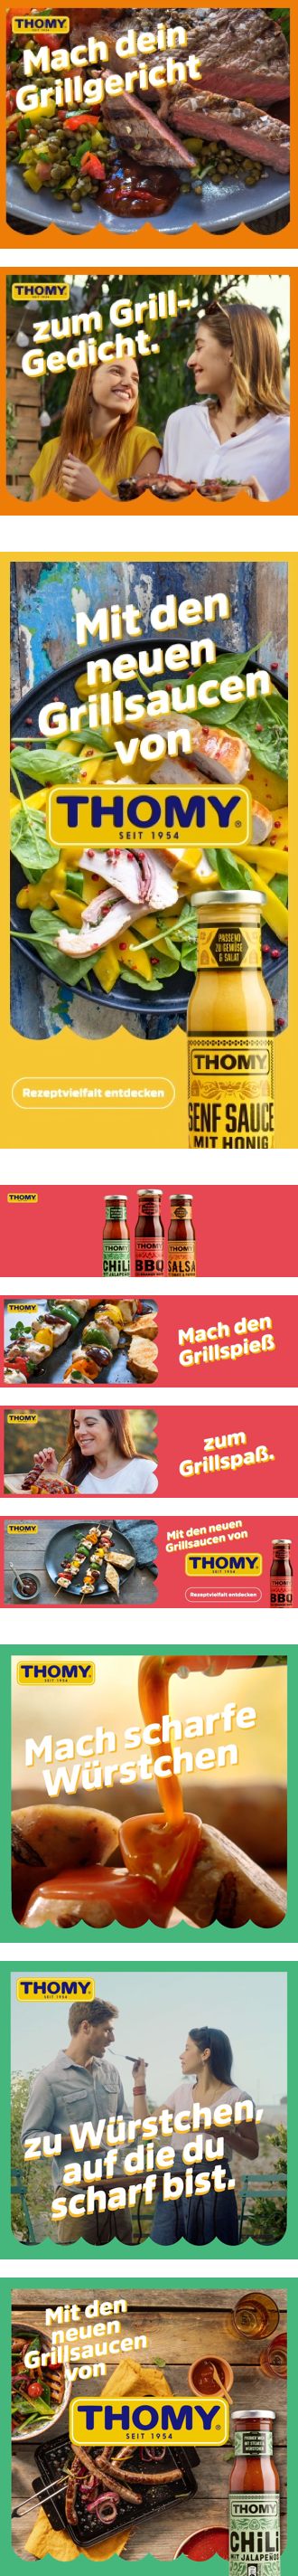 Group of teaser images about THOMY sauces